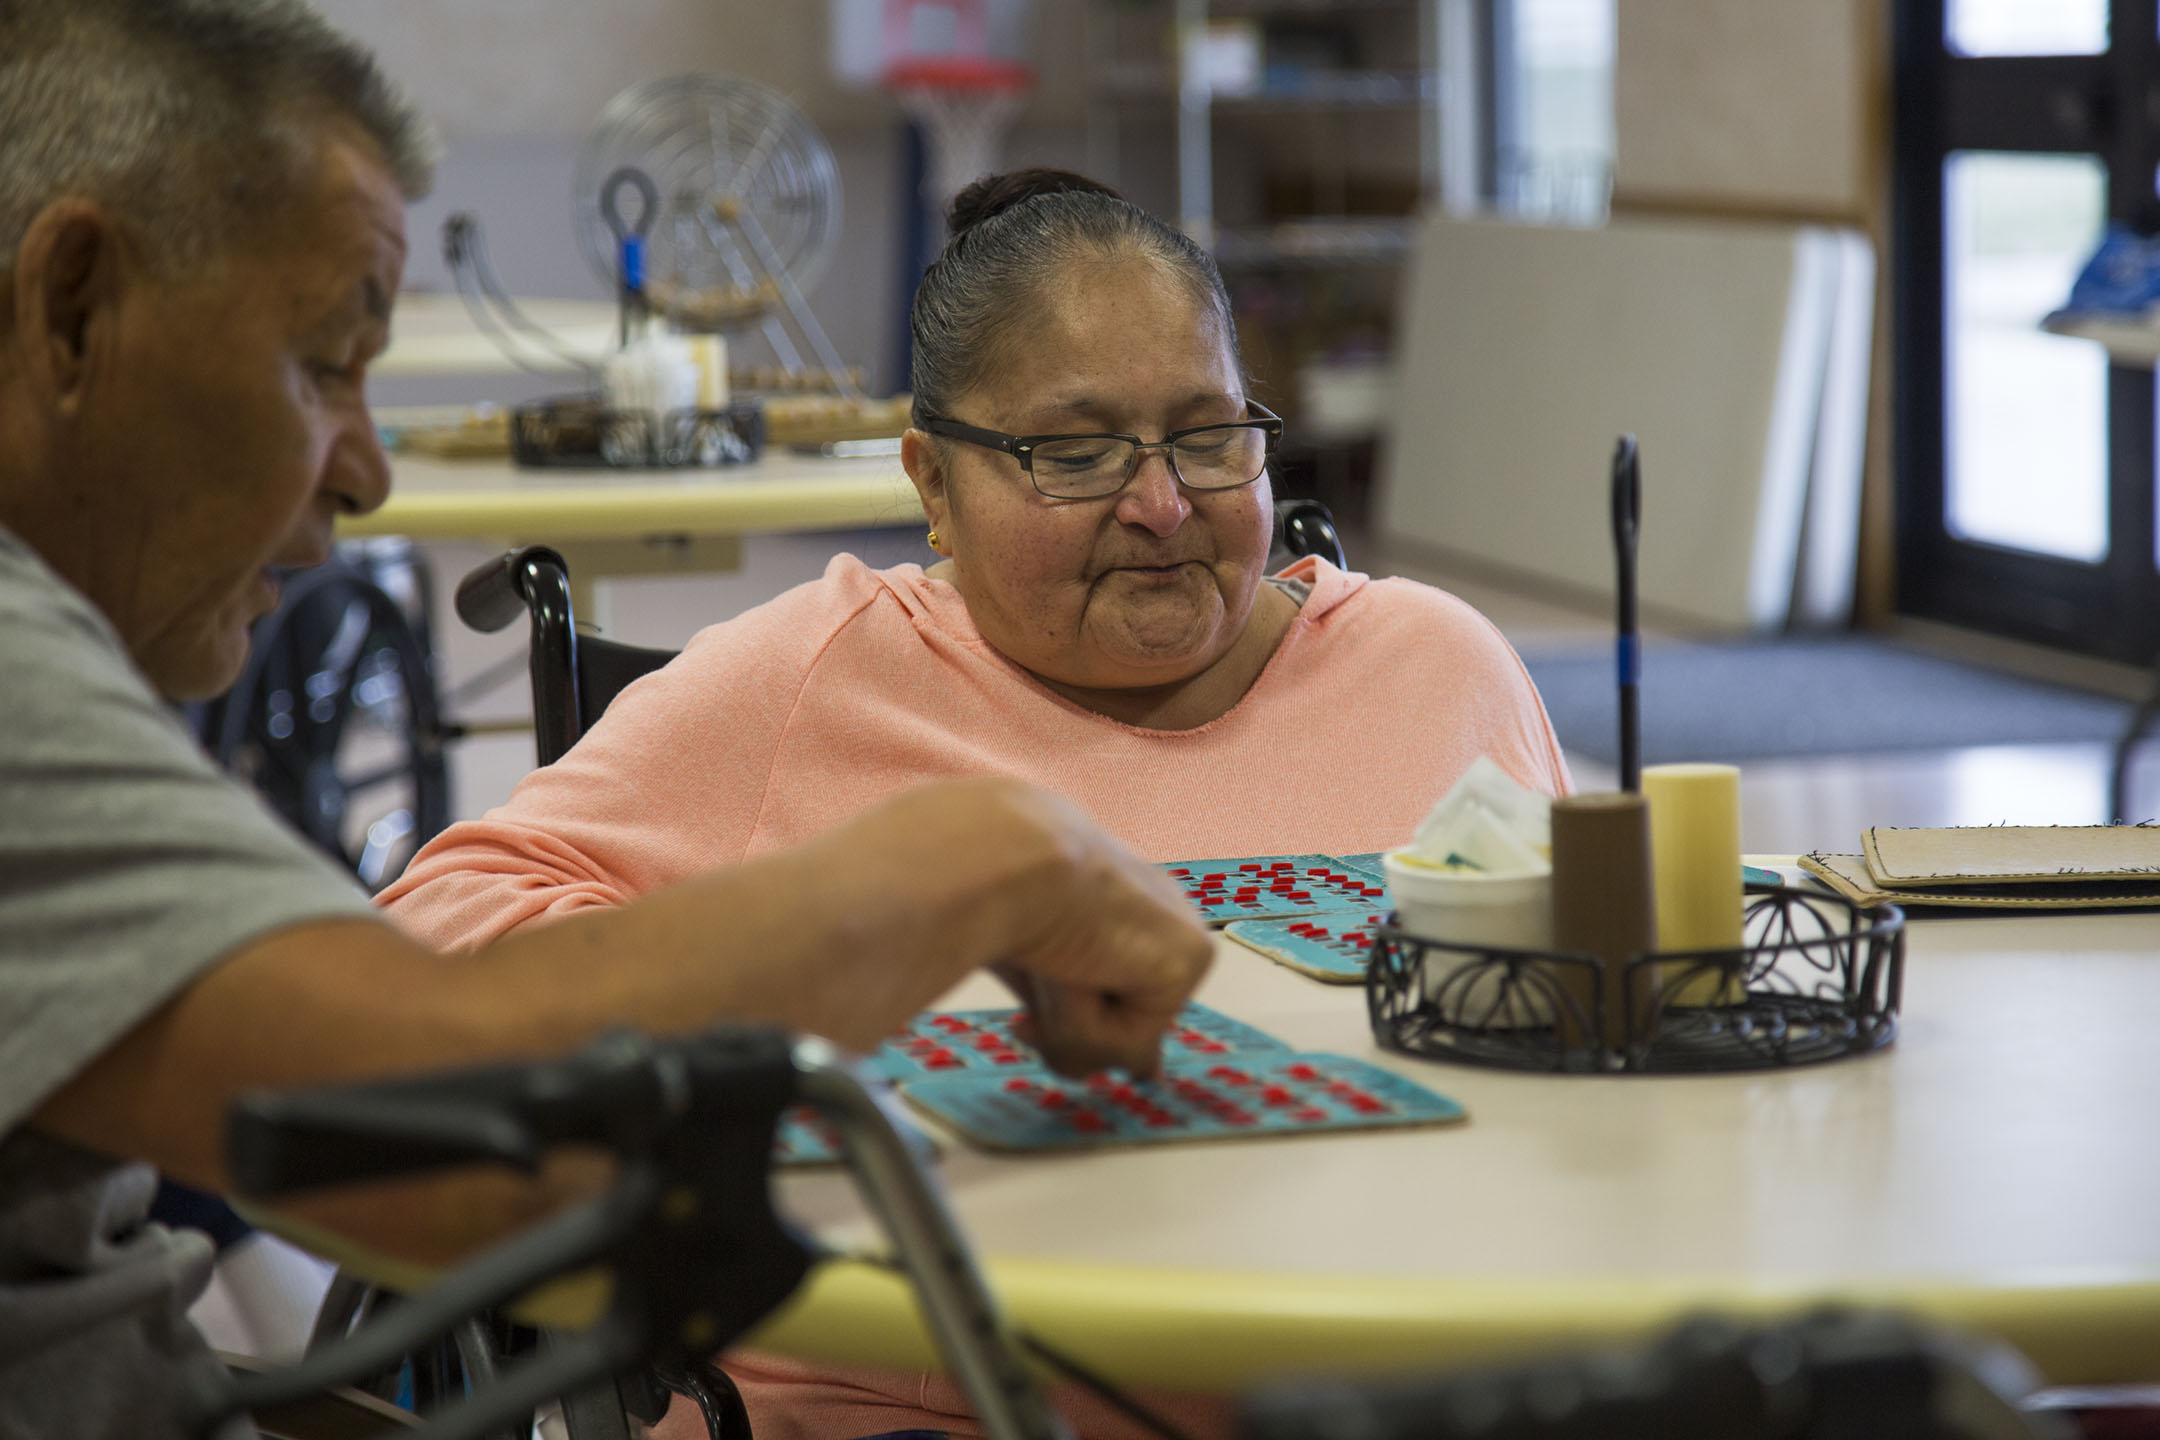 TroyLnn Shotgunn, right, and her father, Kenneth Beartusk, left, play bingo at the Awe Kualawaache Care Center on the Crow Reservation. The center offers activities for its residents, including trips to the Sheridan Rodeo and the Crow Fair.